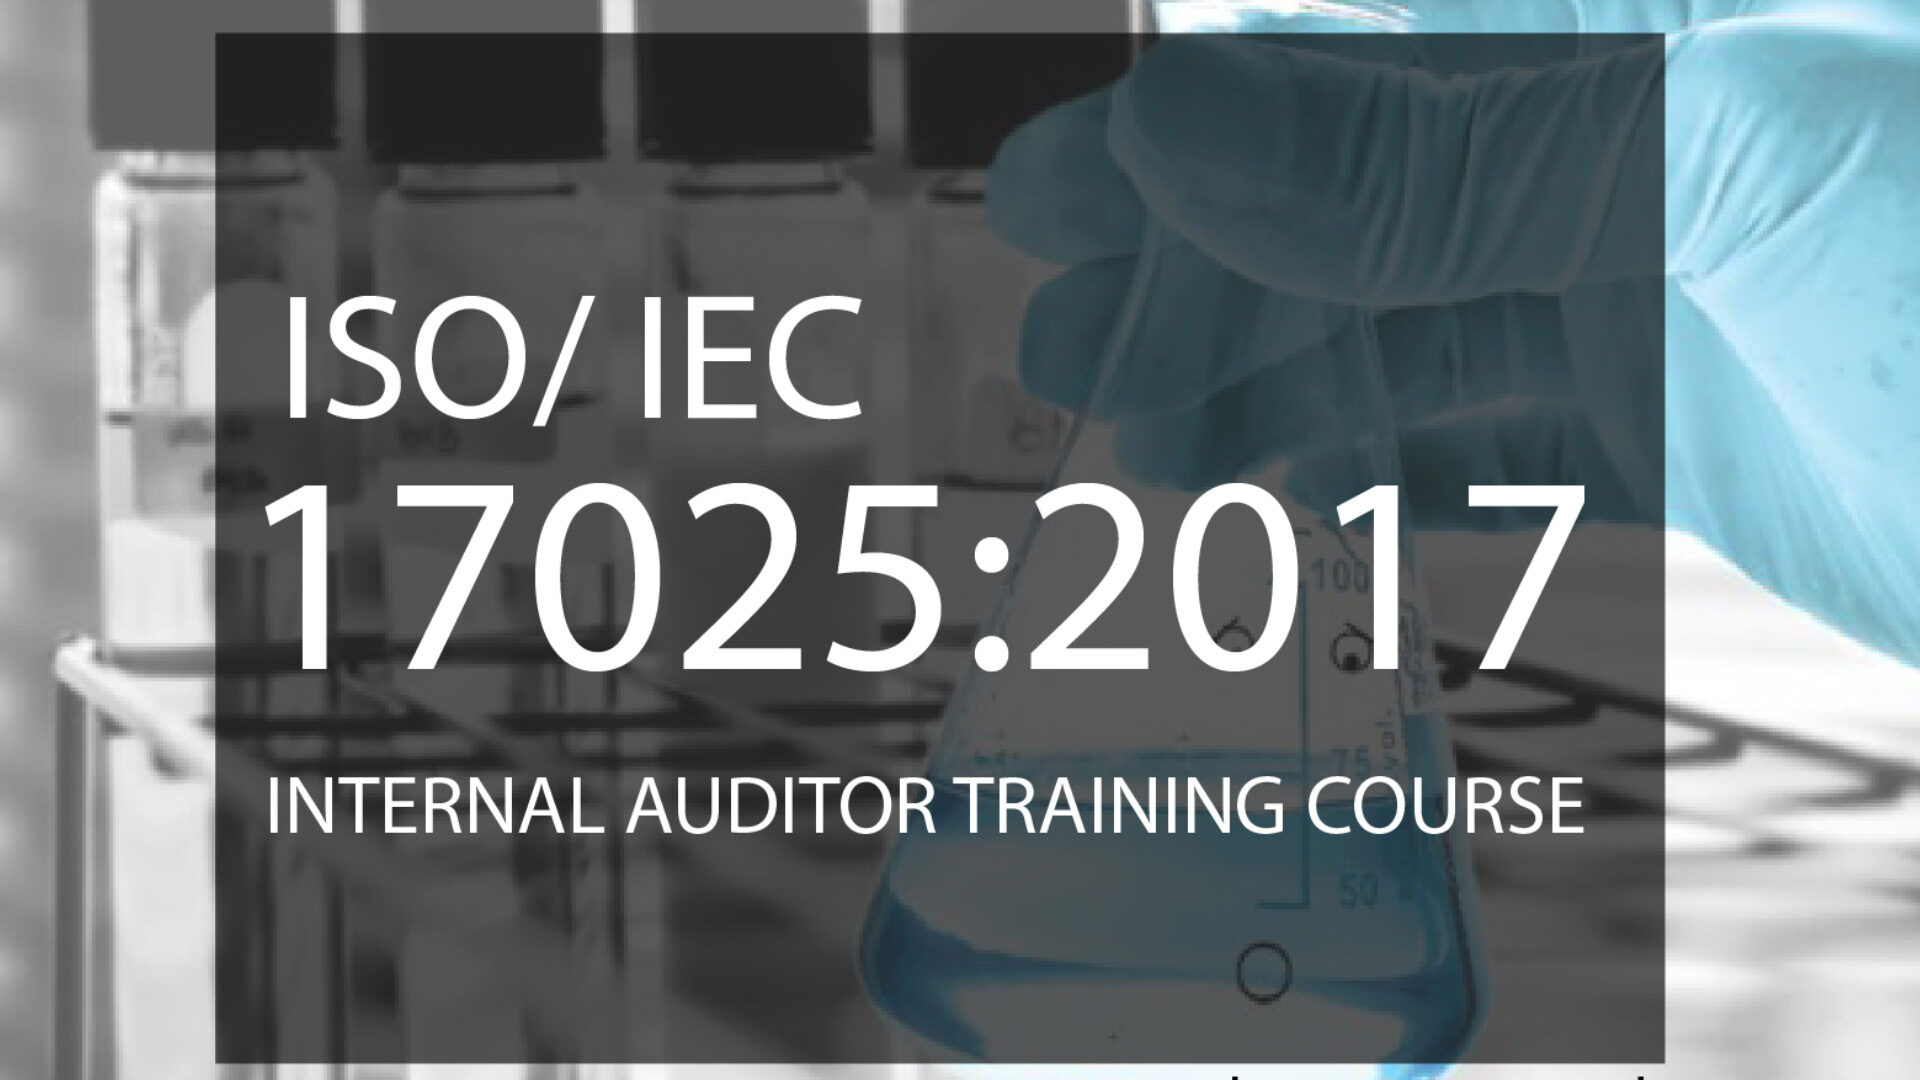 ISO/IEC 17025:2017 Internal Auditor Training Course